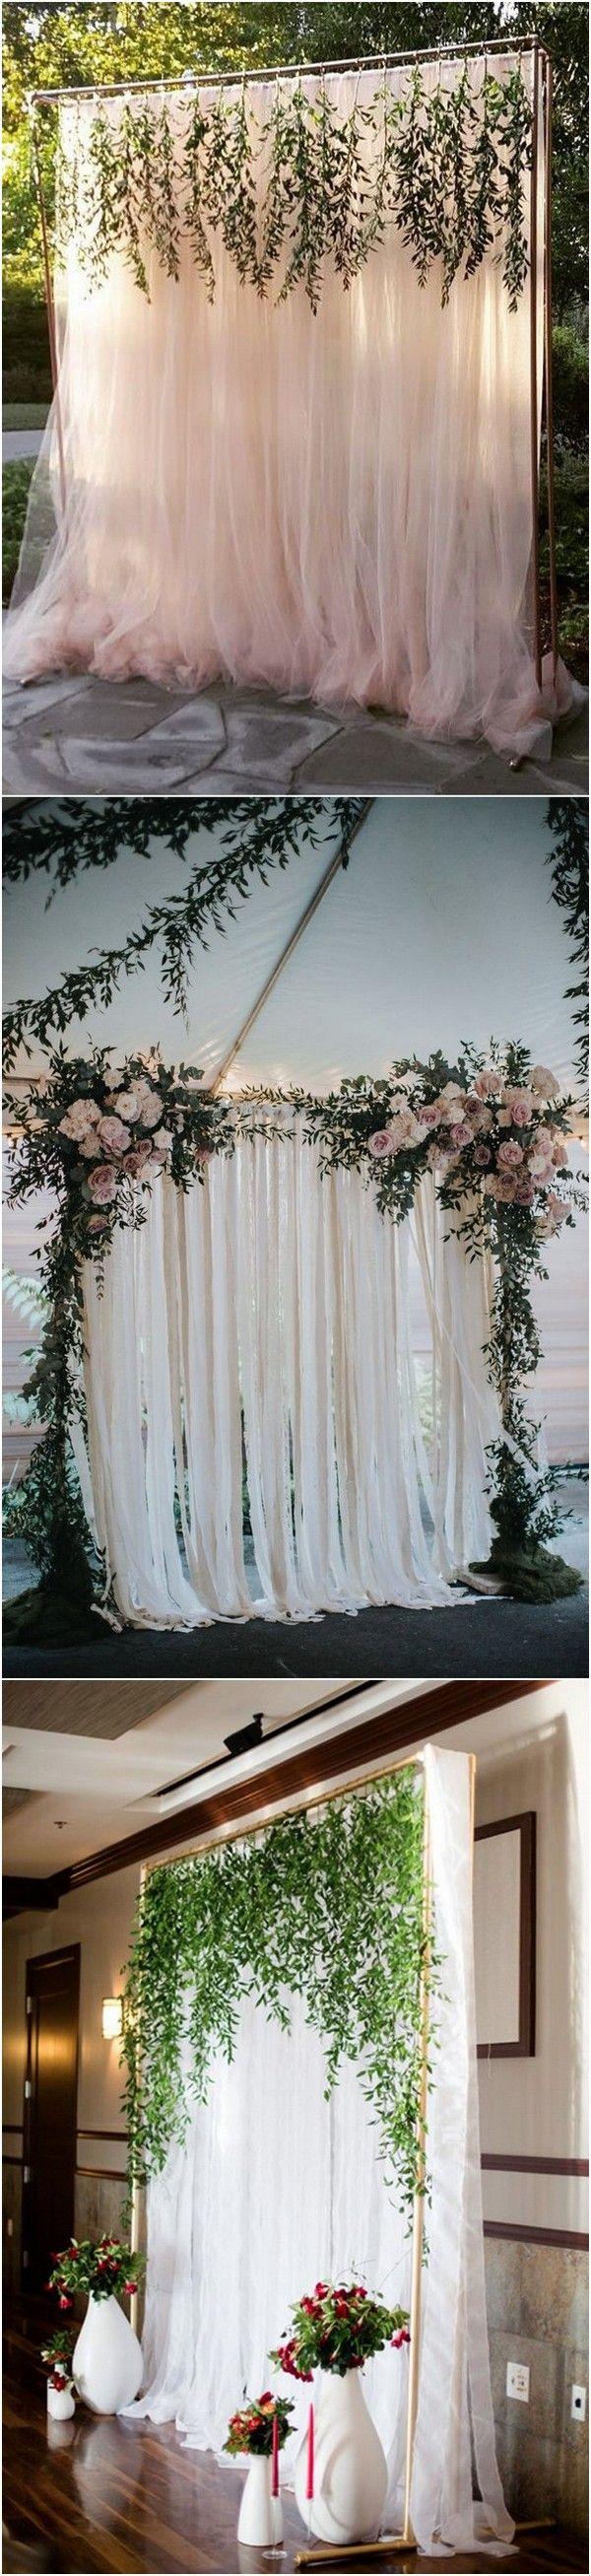 Wedding - Trending-15 Hottest Wedding Backdrop Ideas For Your Ceremony - Page 2 Of 3